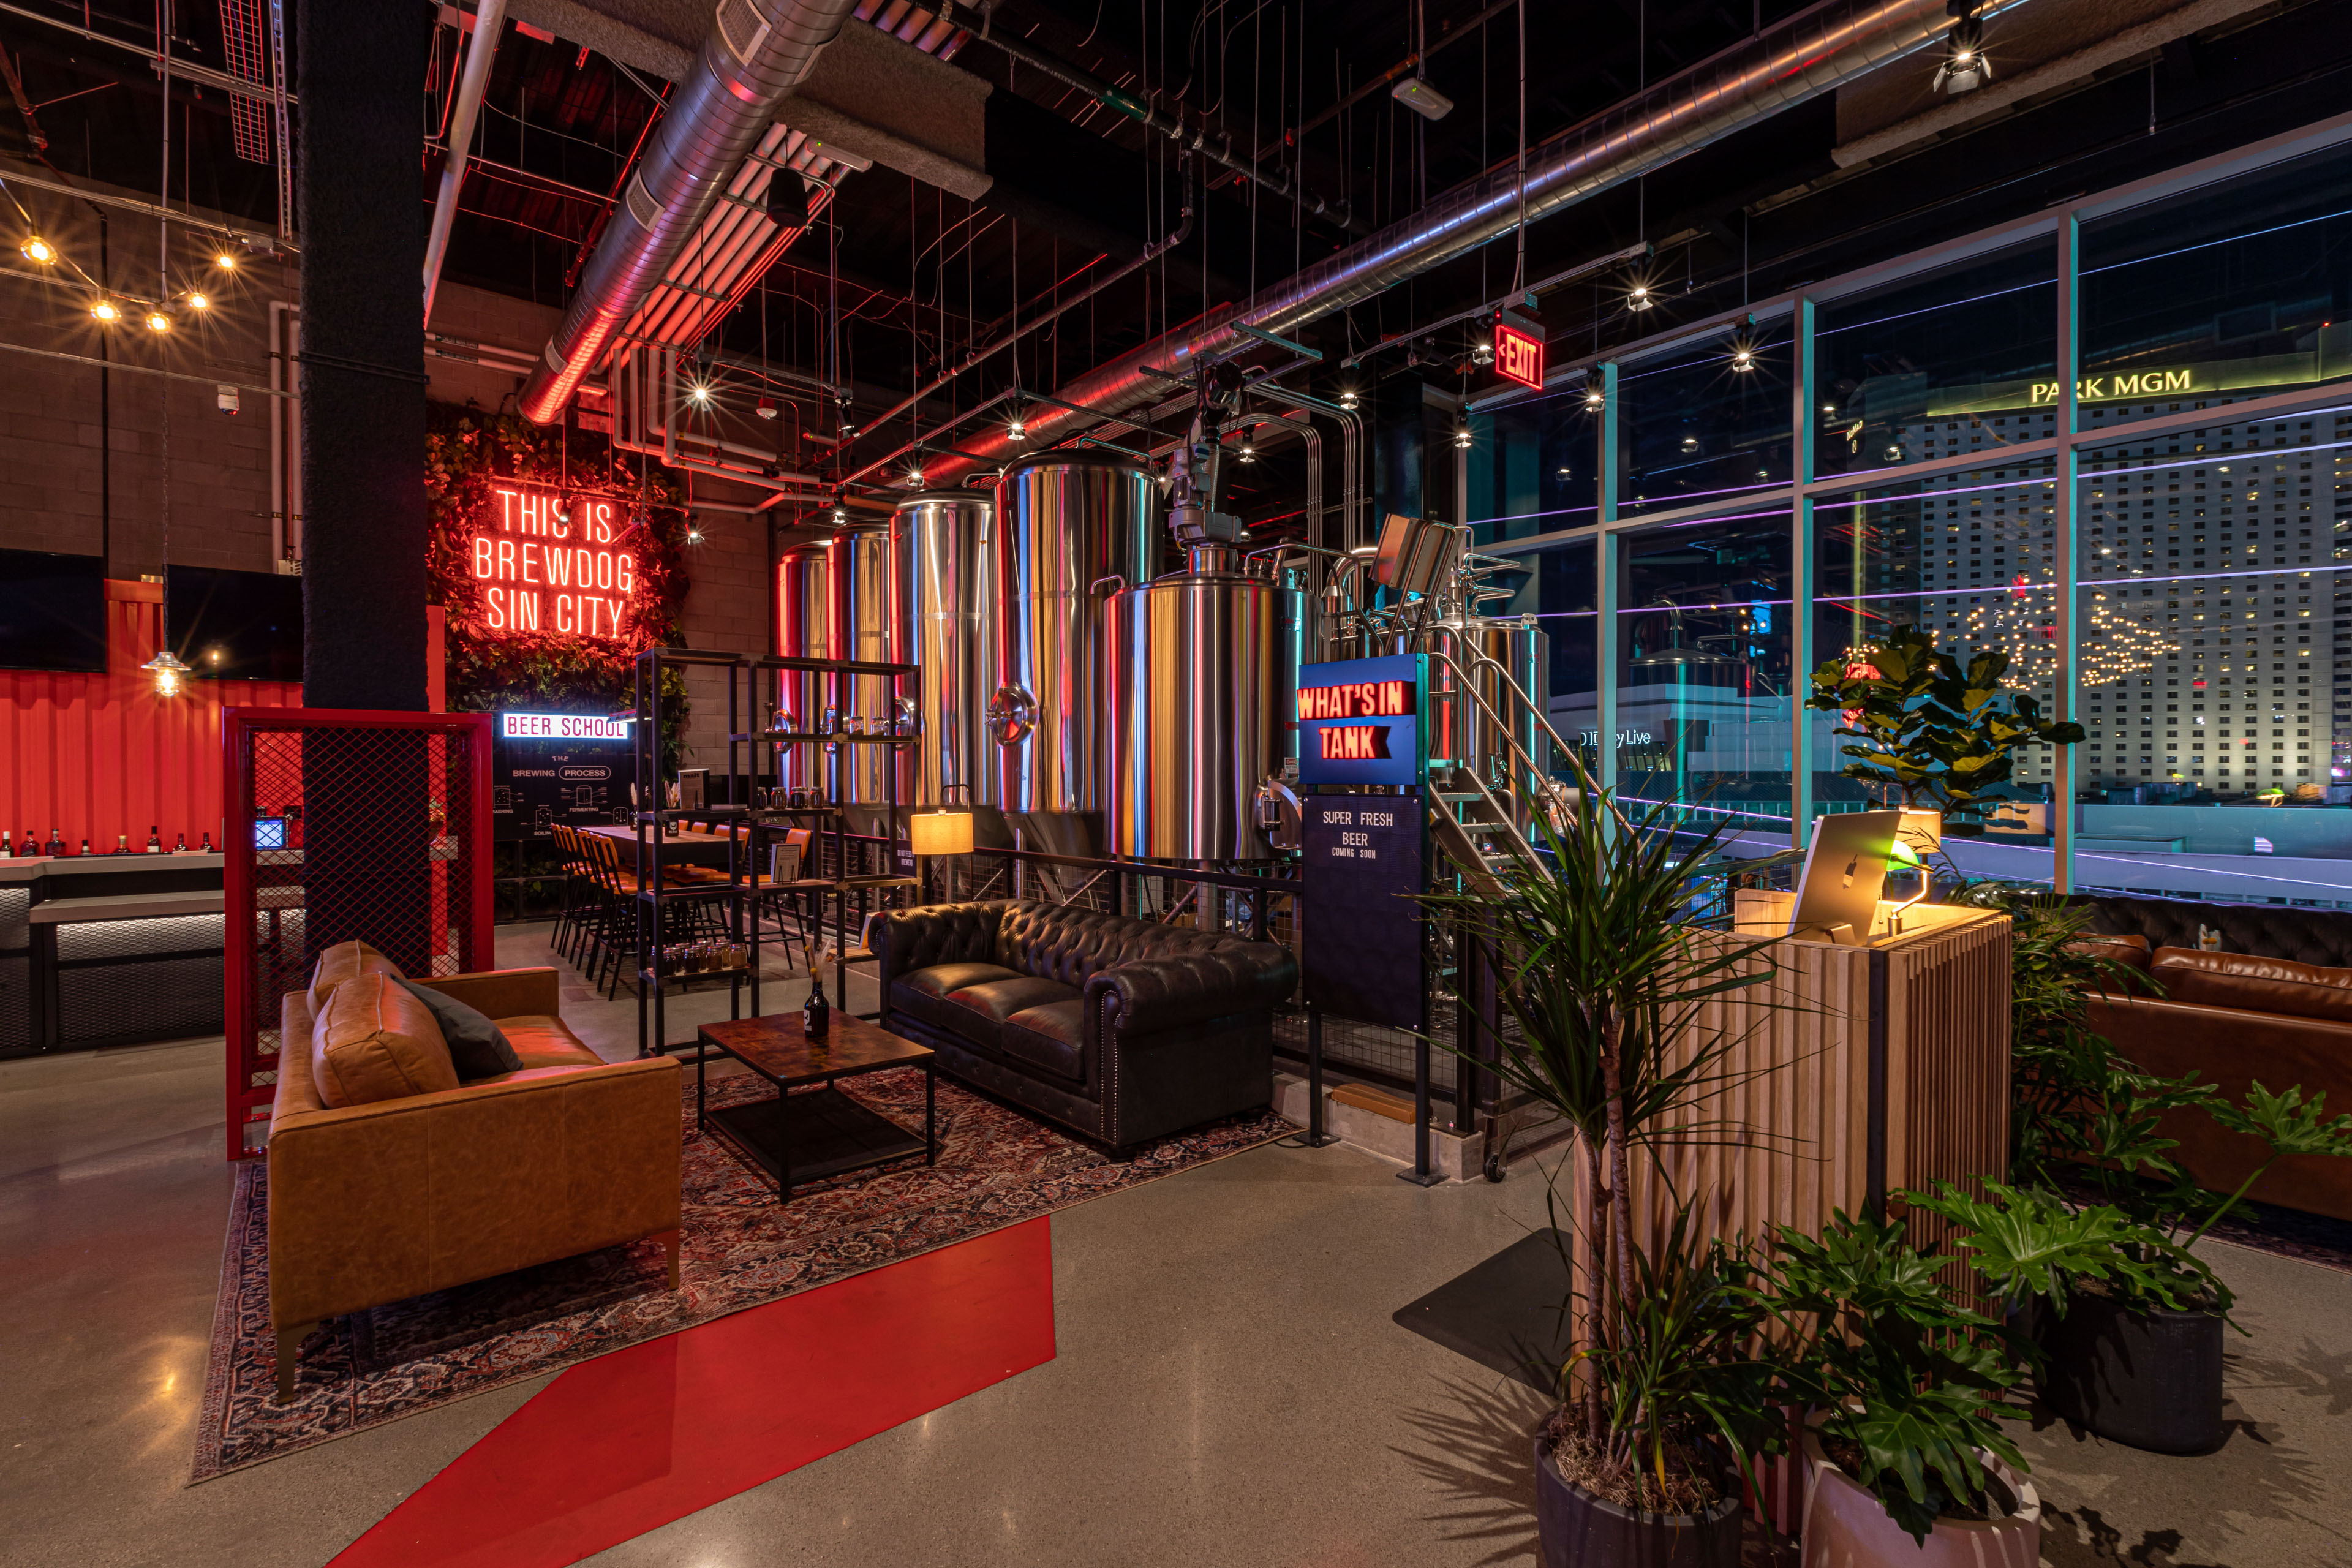 BrewDog interior with couches and neon signs